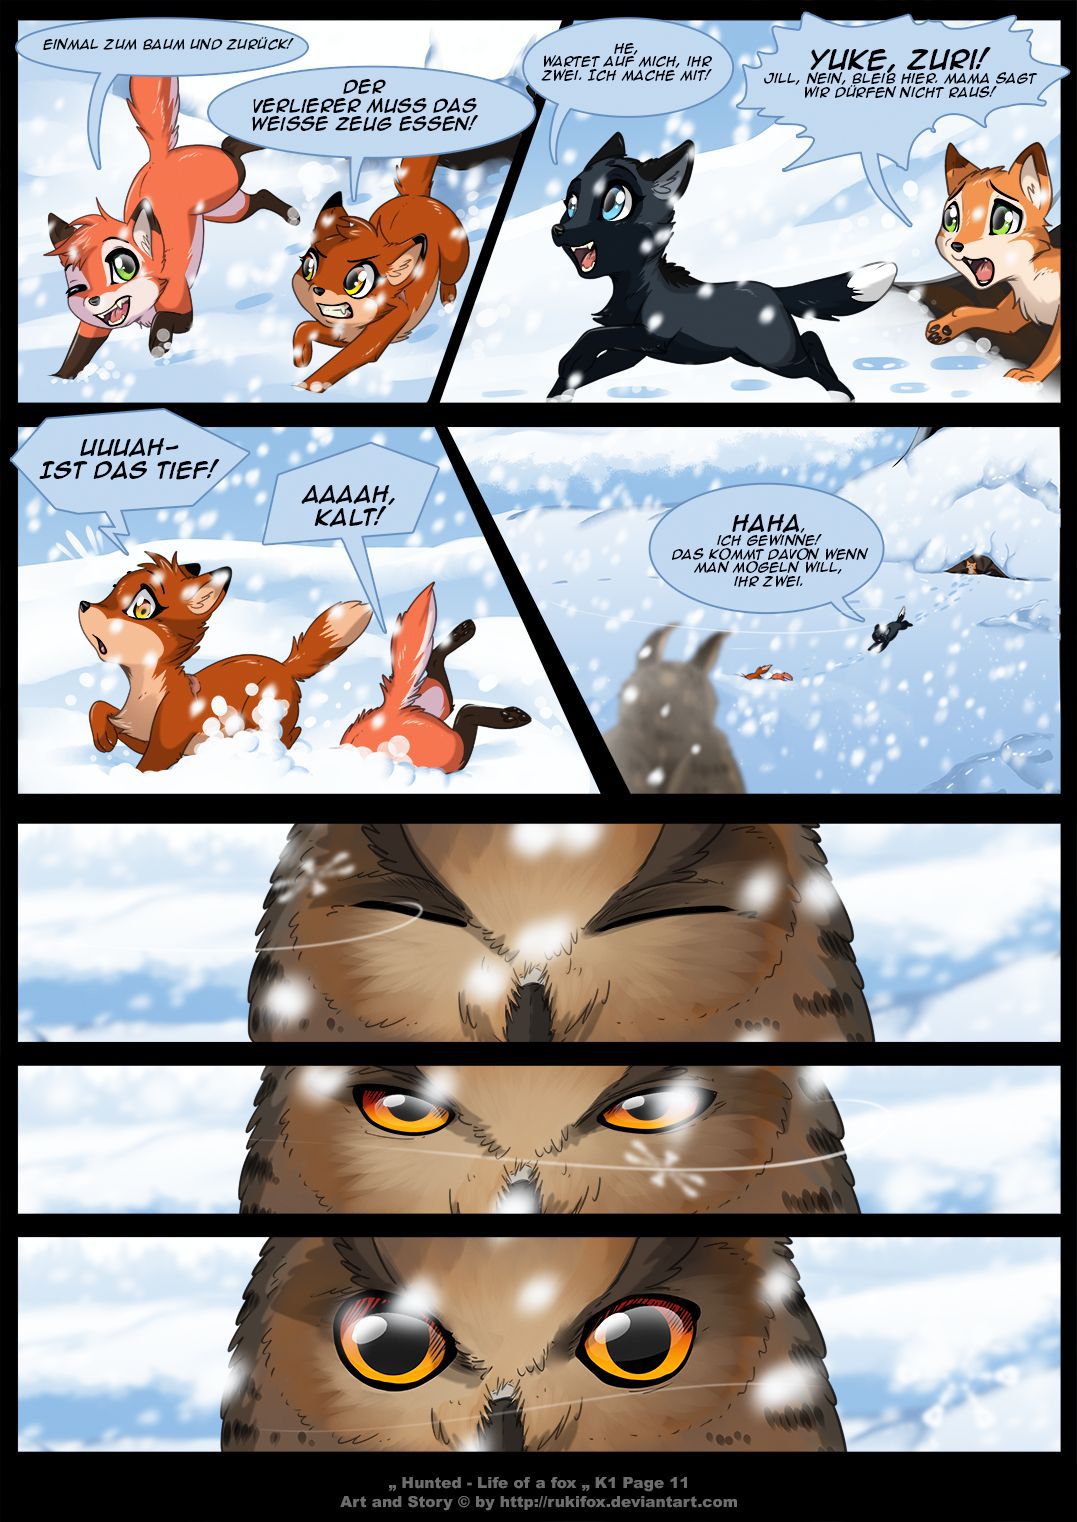 [RukiFox] Hunted -Life of a Fox - Chapter 1 [On Going]{German} 13